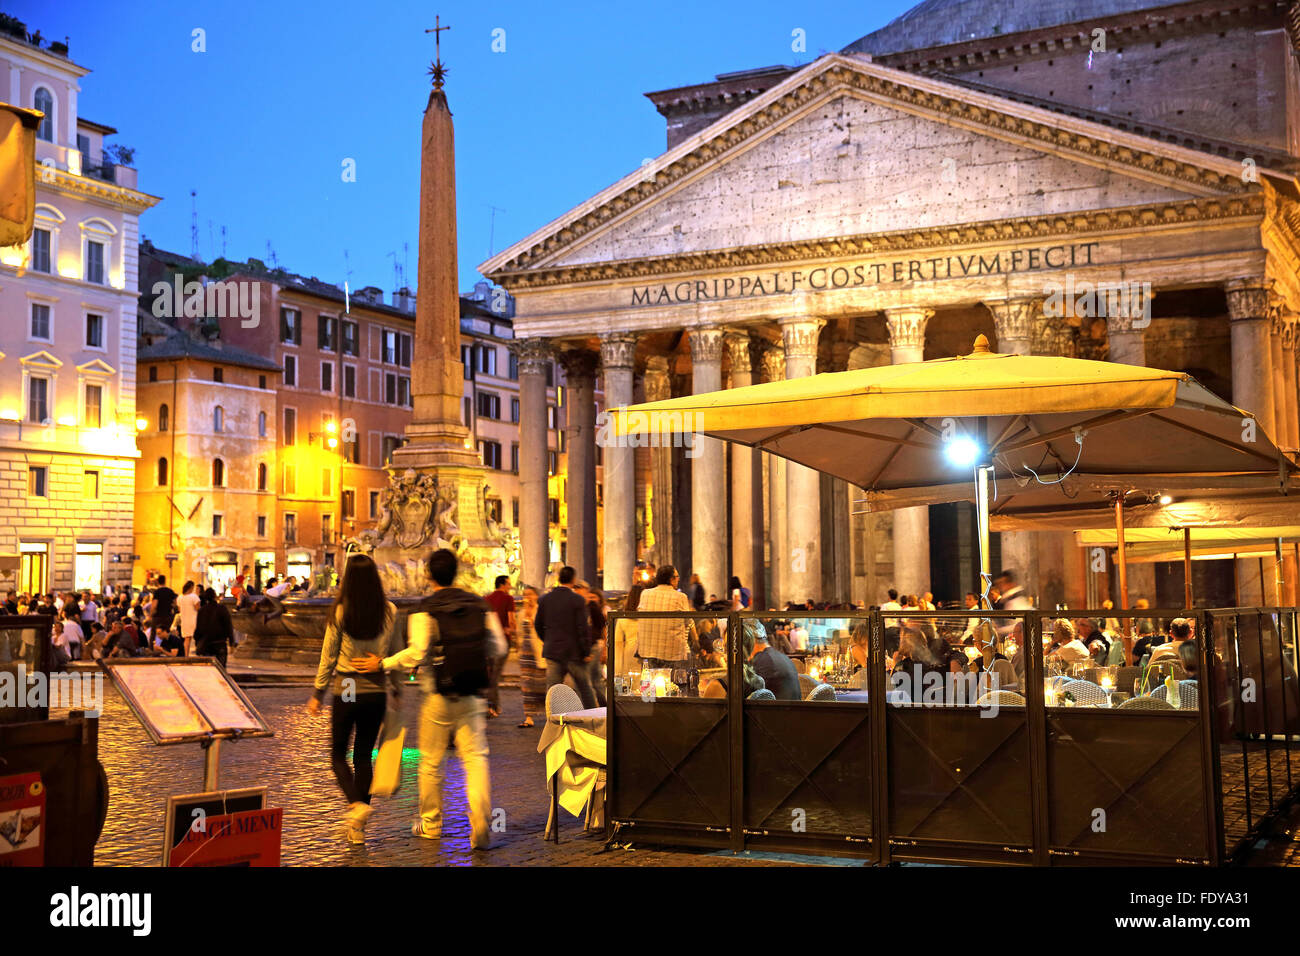 Piazza della Rotonda at night with the Pantheon in the background. Stock Photo